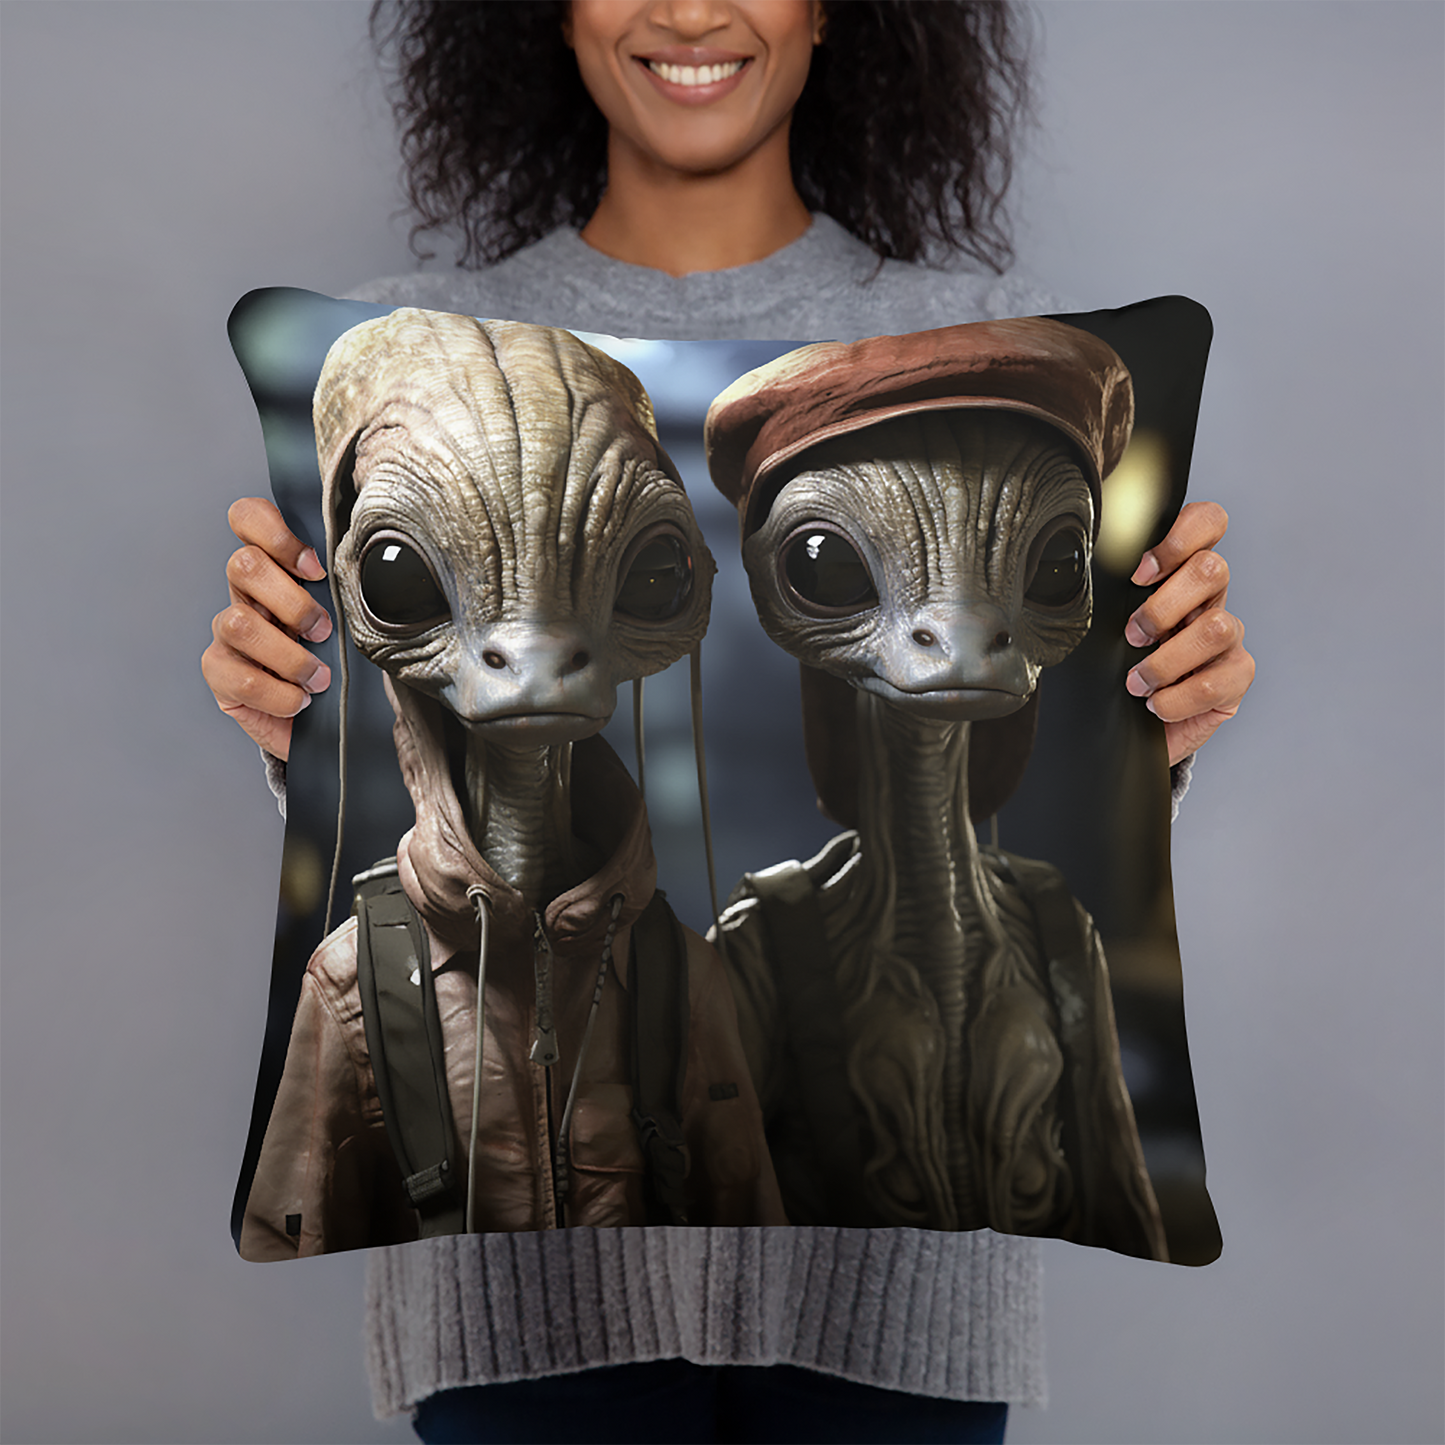 Space Throw Pillow Aliens in Red Caps and Coats Polyester Decorative Cushion 18x18